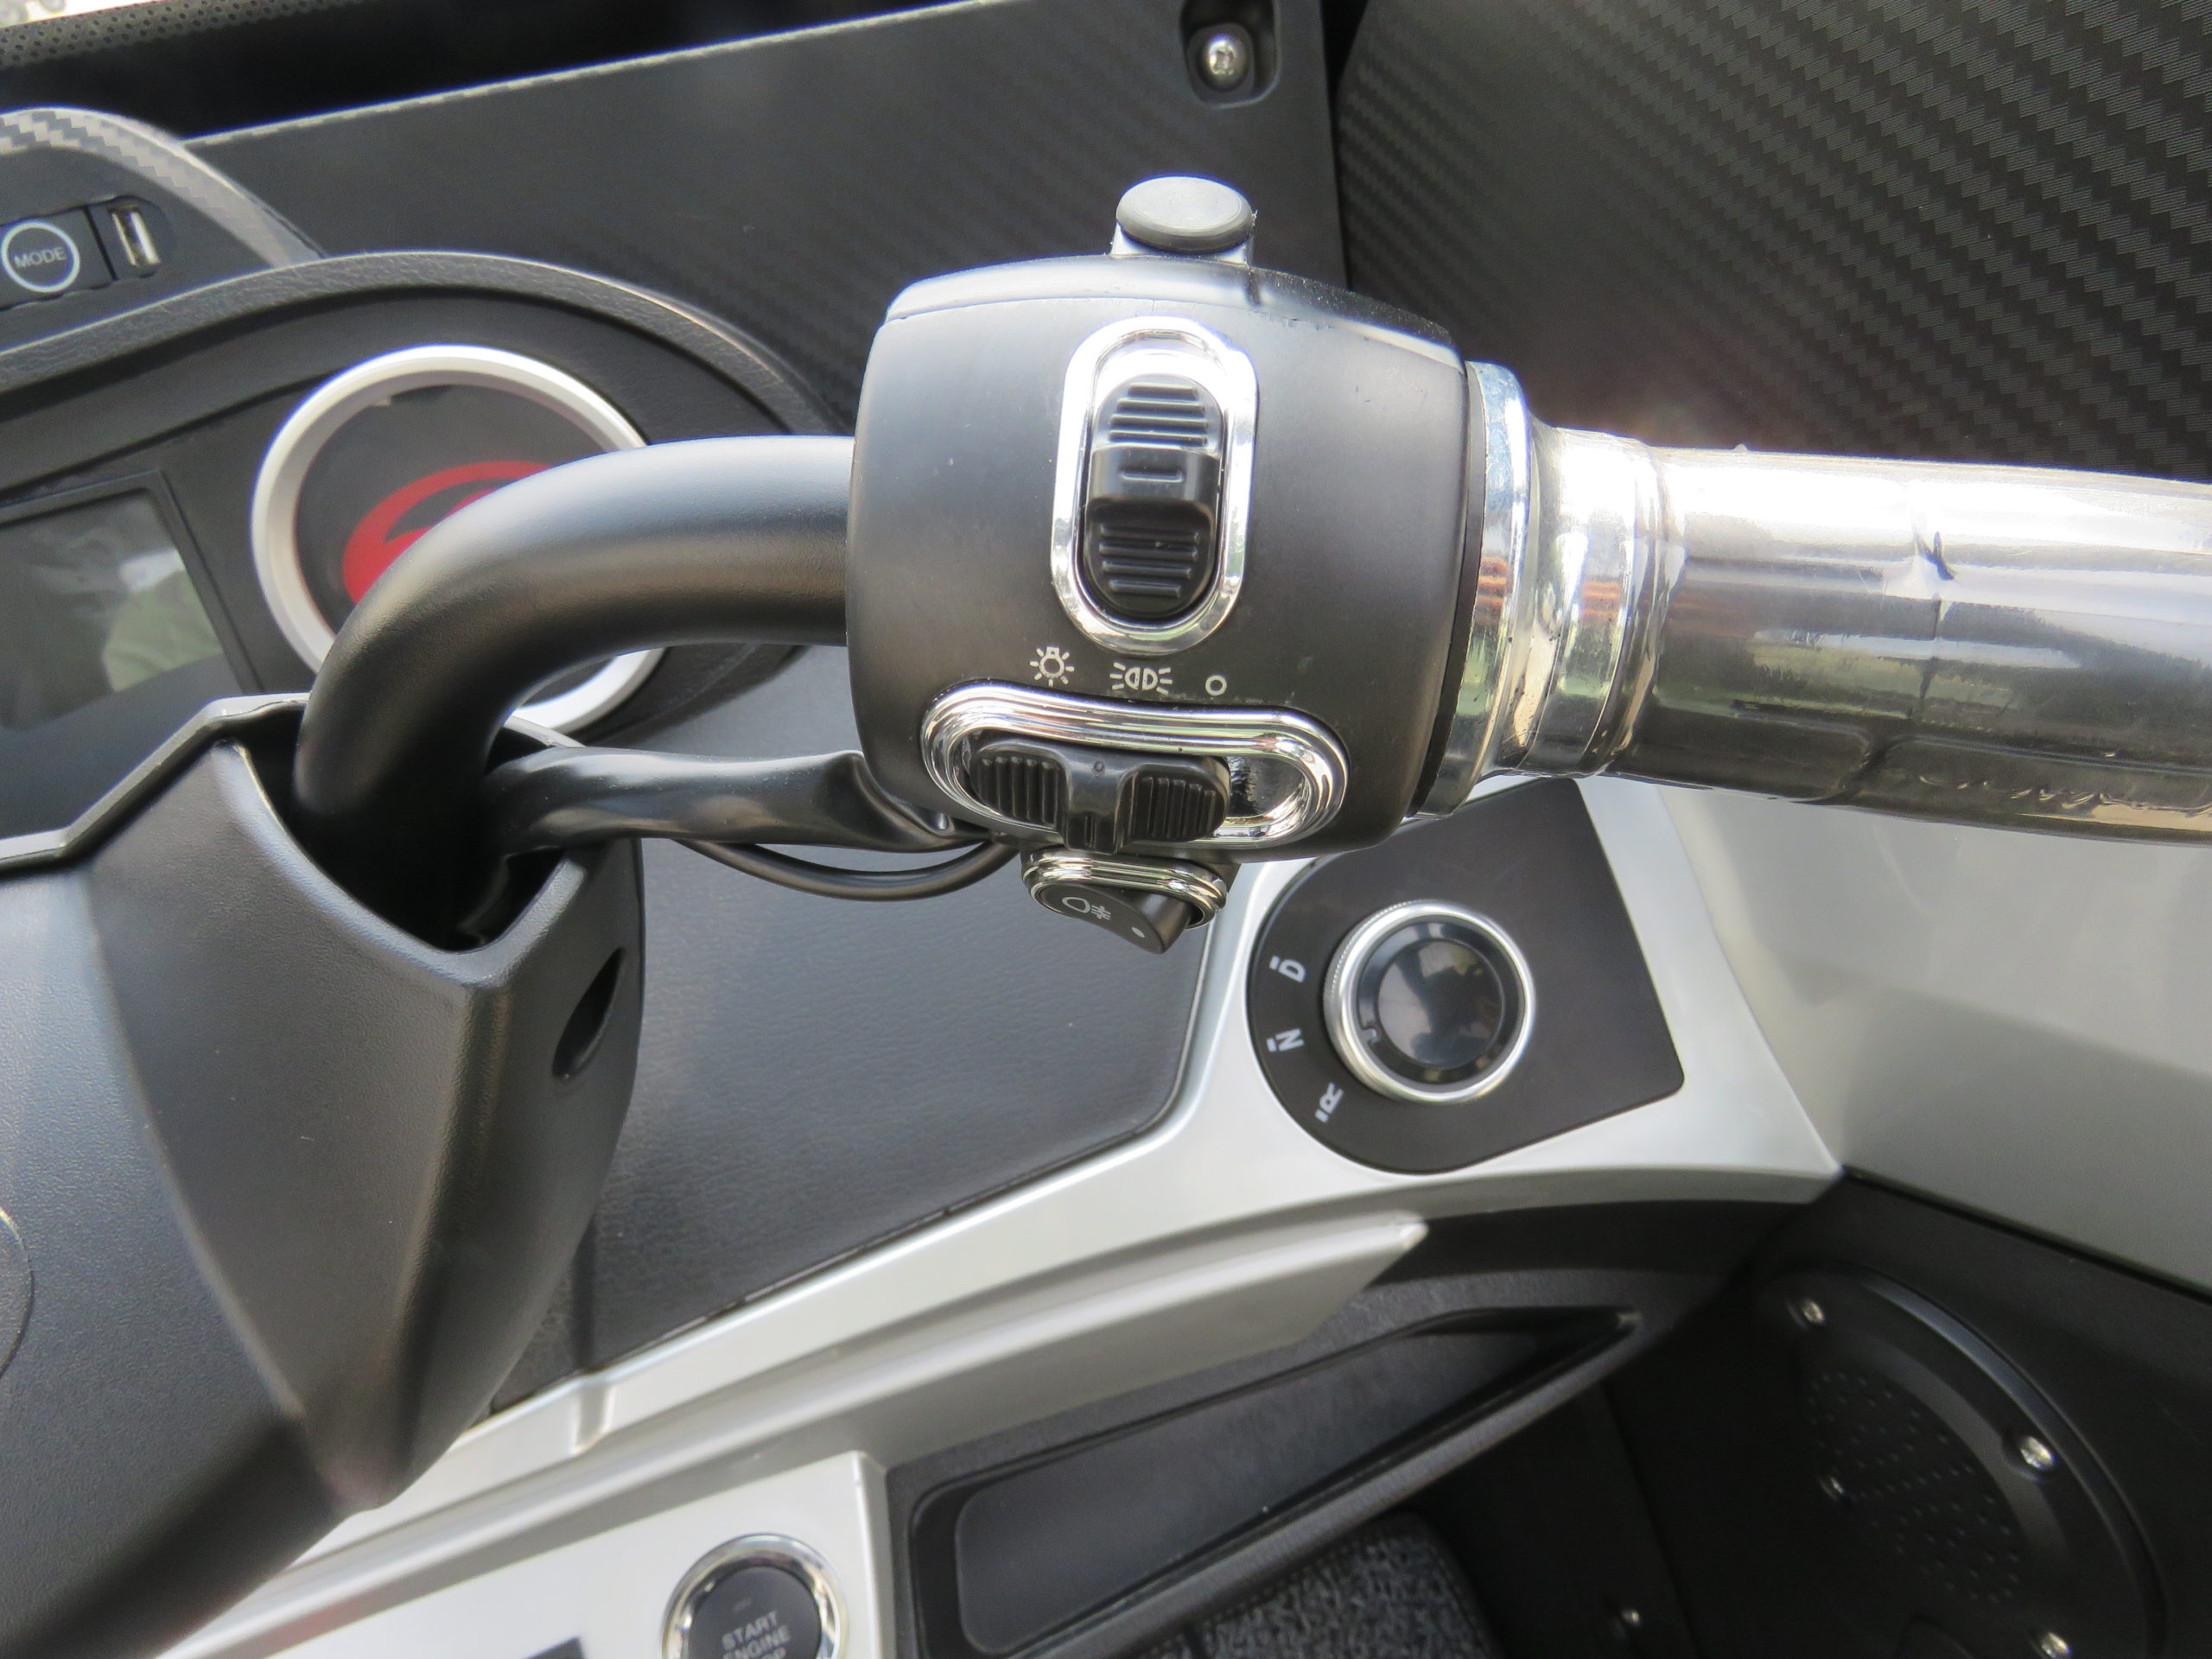 Right hand controls of eTrikeCo's ETR100C electric trike